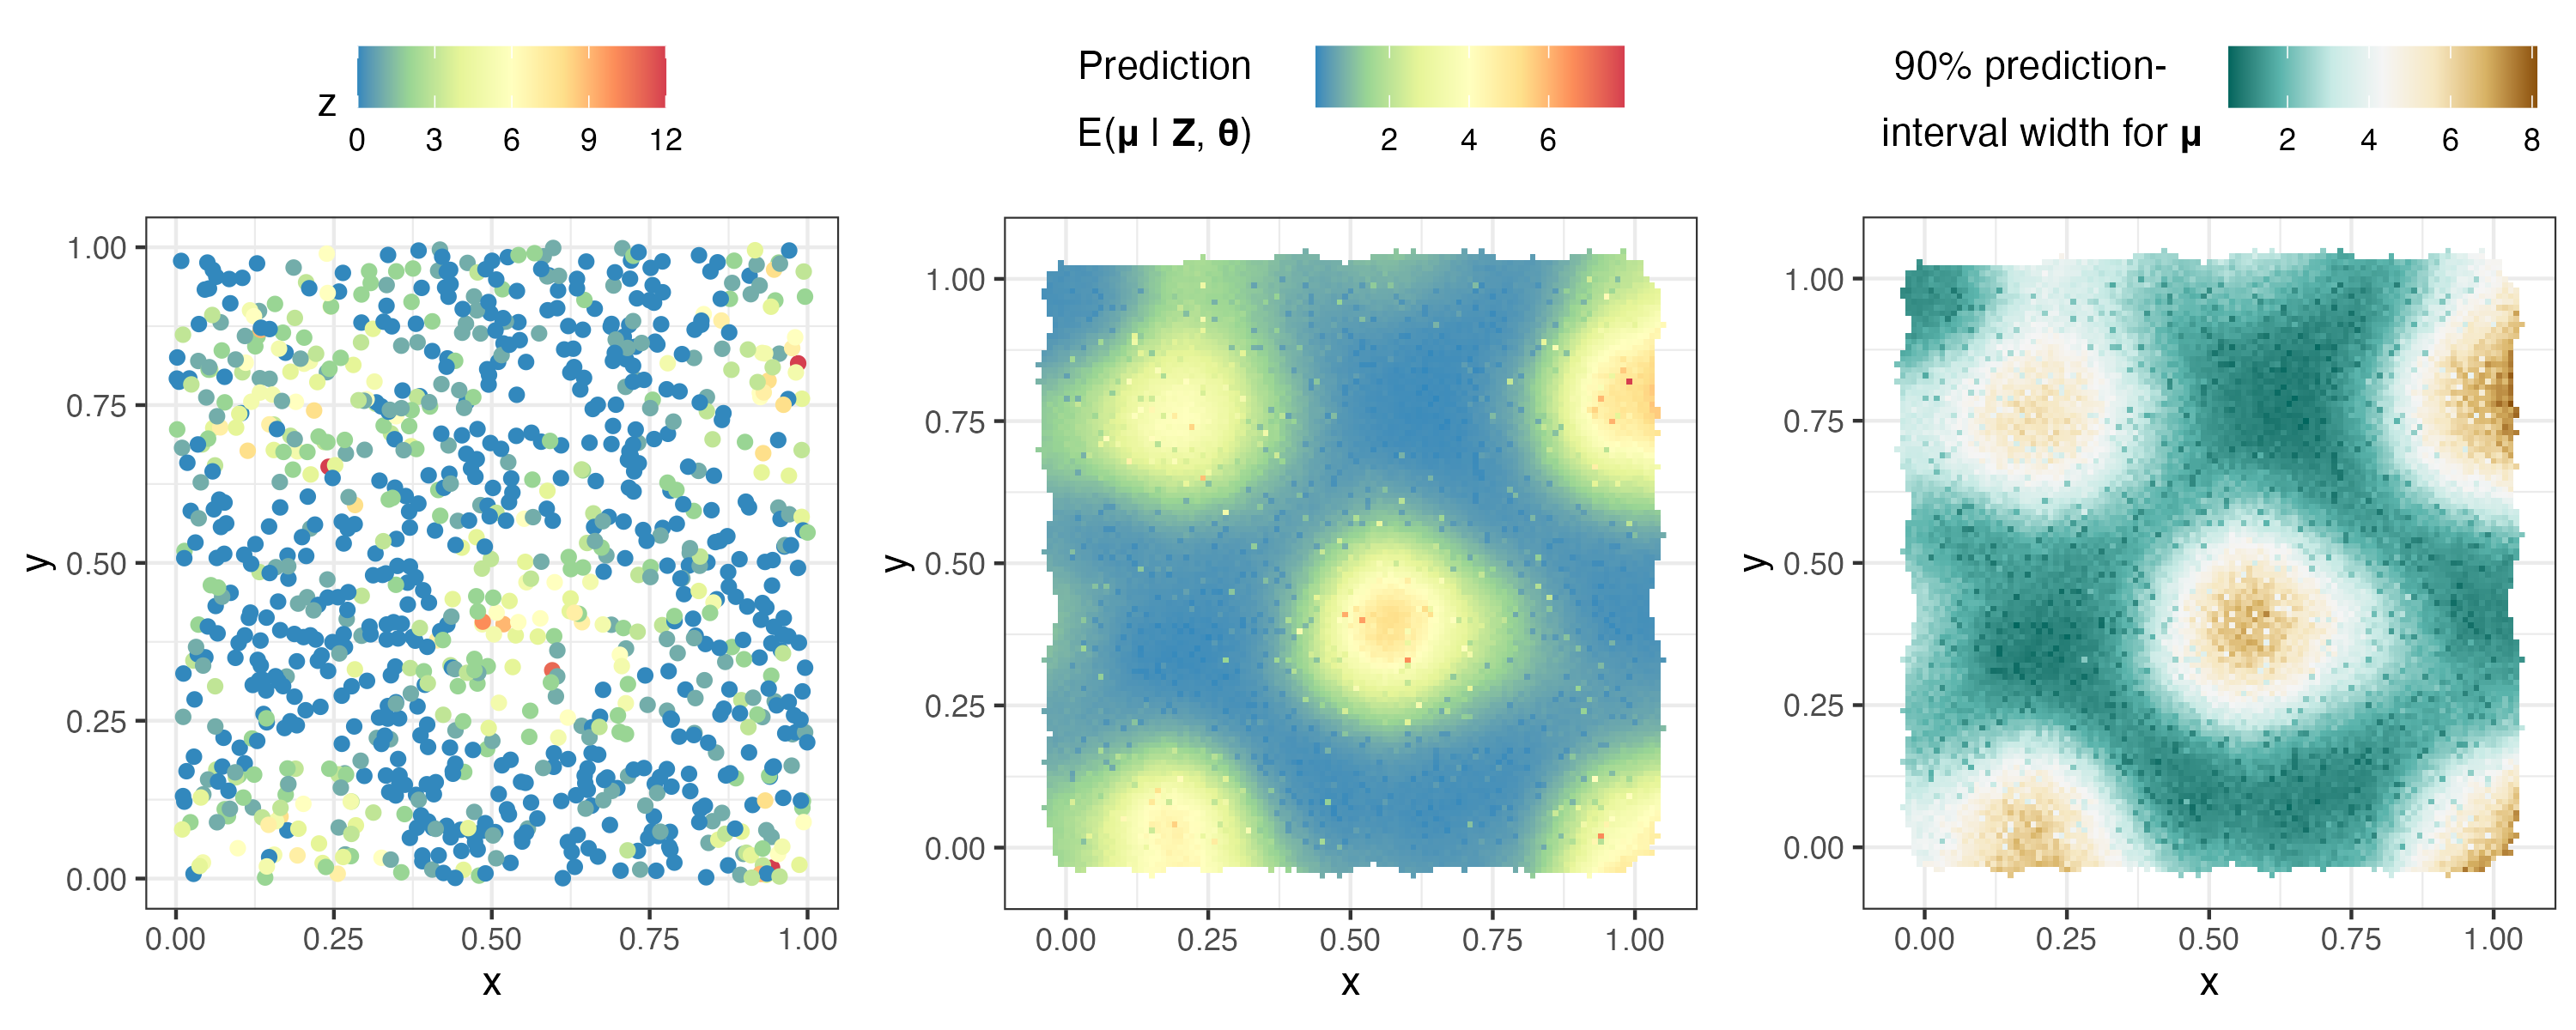 (Left) Poisson data. (Centre) Prediction of the mean response. (Right) Prediction interval width of the mean response.